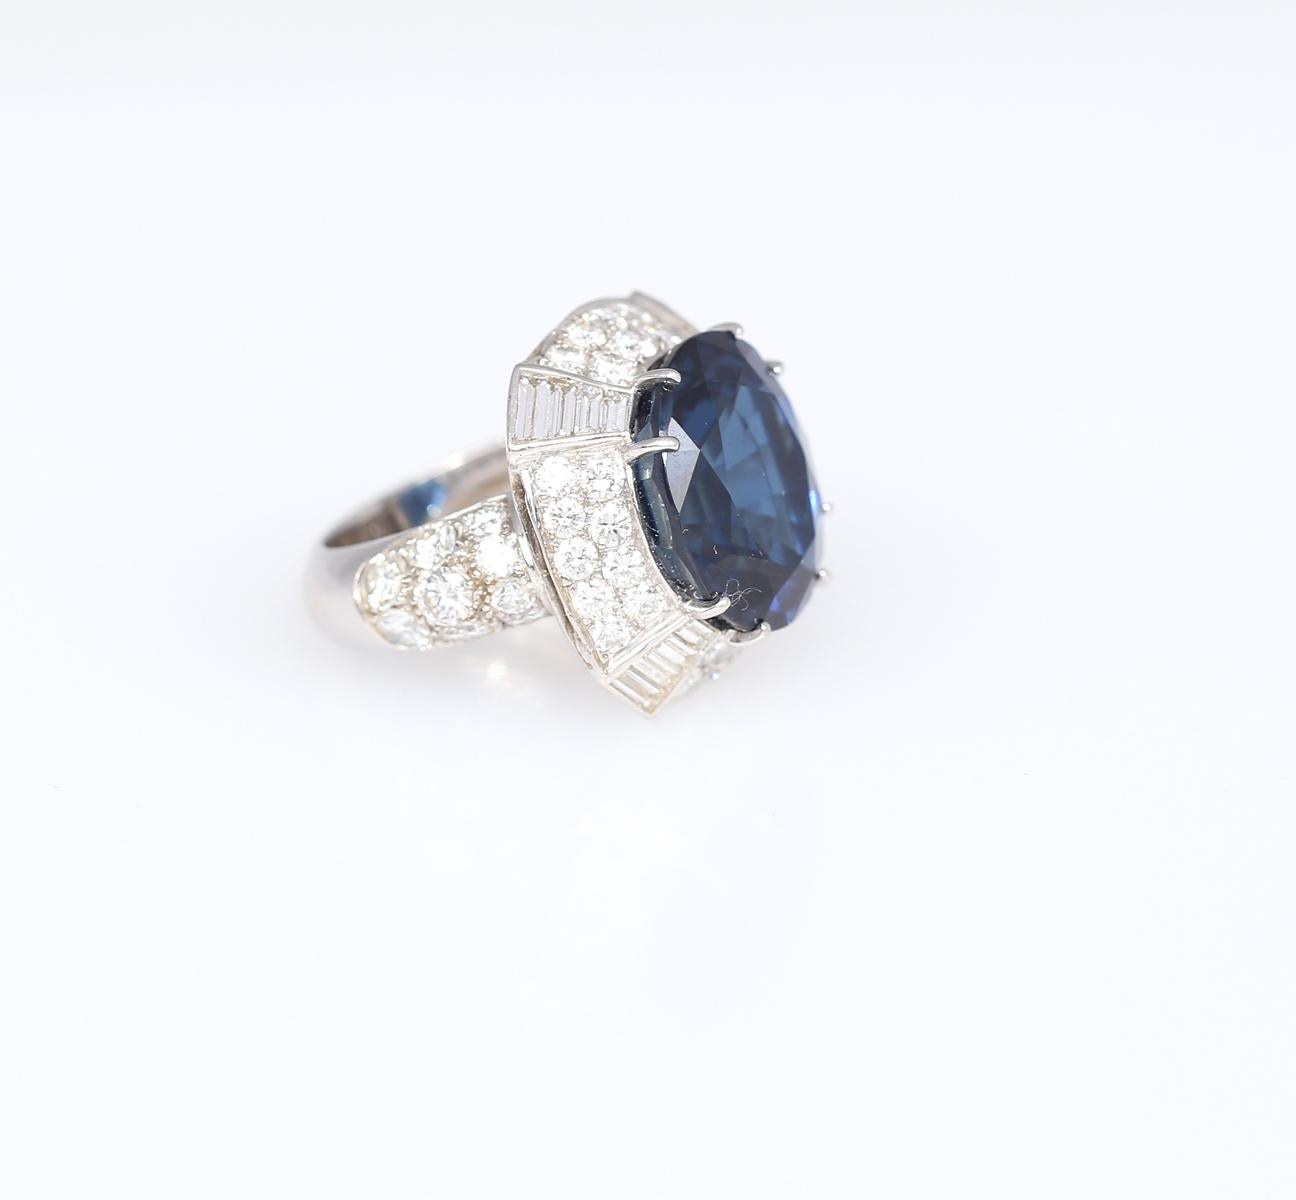 14.6 Ct Natural Sapphire Certified Diamond Ring 18K Gold, 1998 For Sale 1